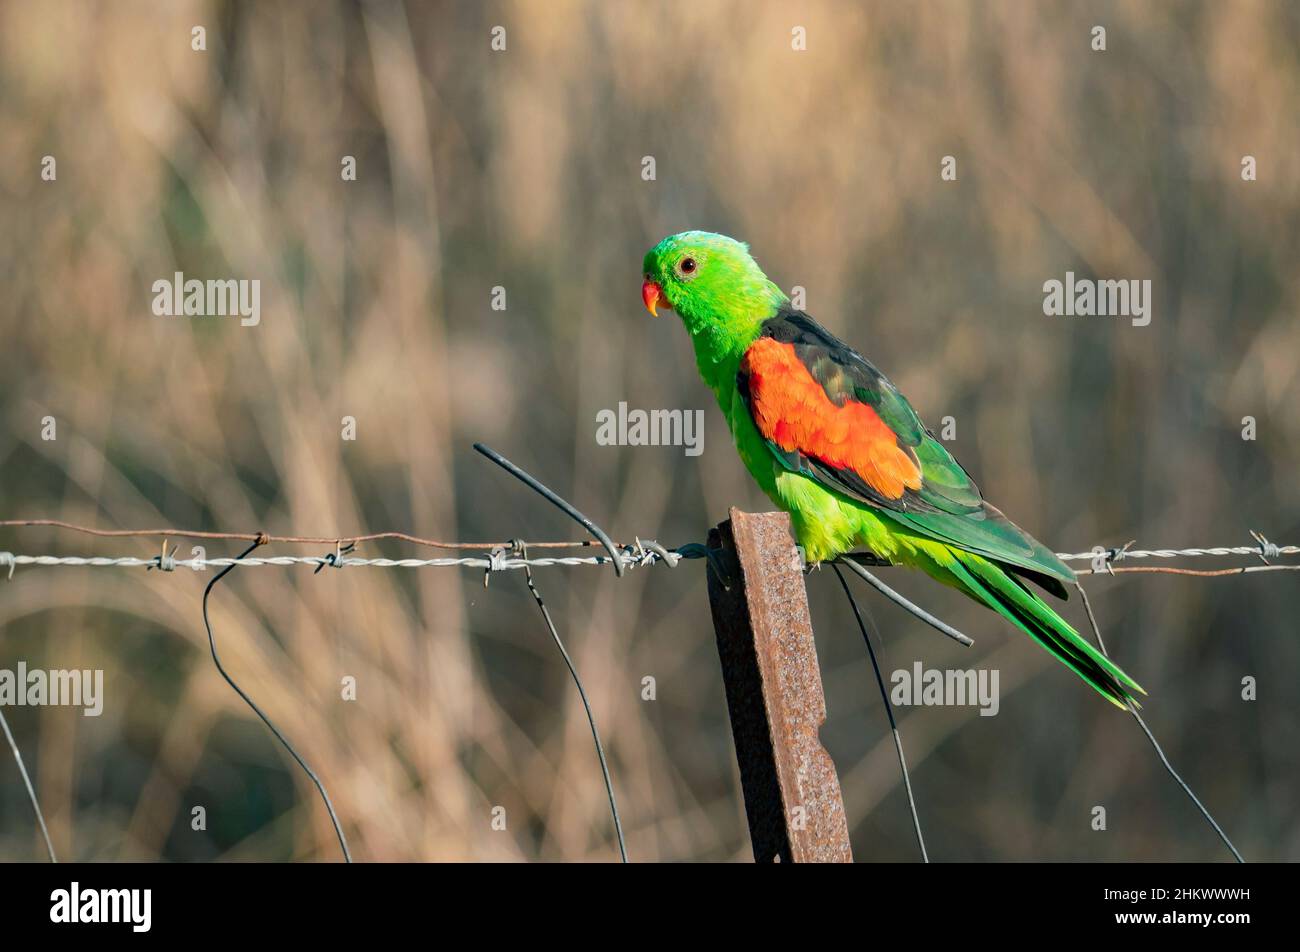 Male Red-winged parrot, Aprosmictus erythropterus, perched on a wire fence in farmland in regional Australia. Stock Photo